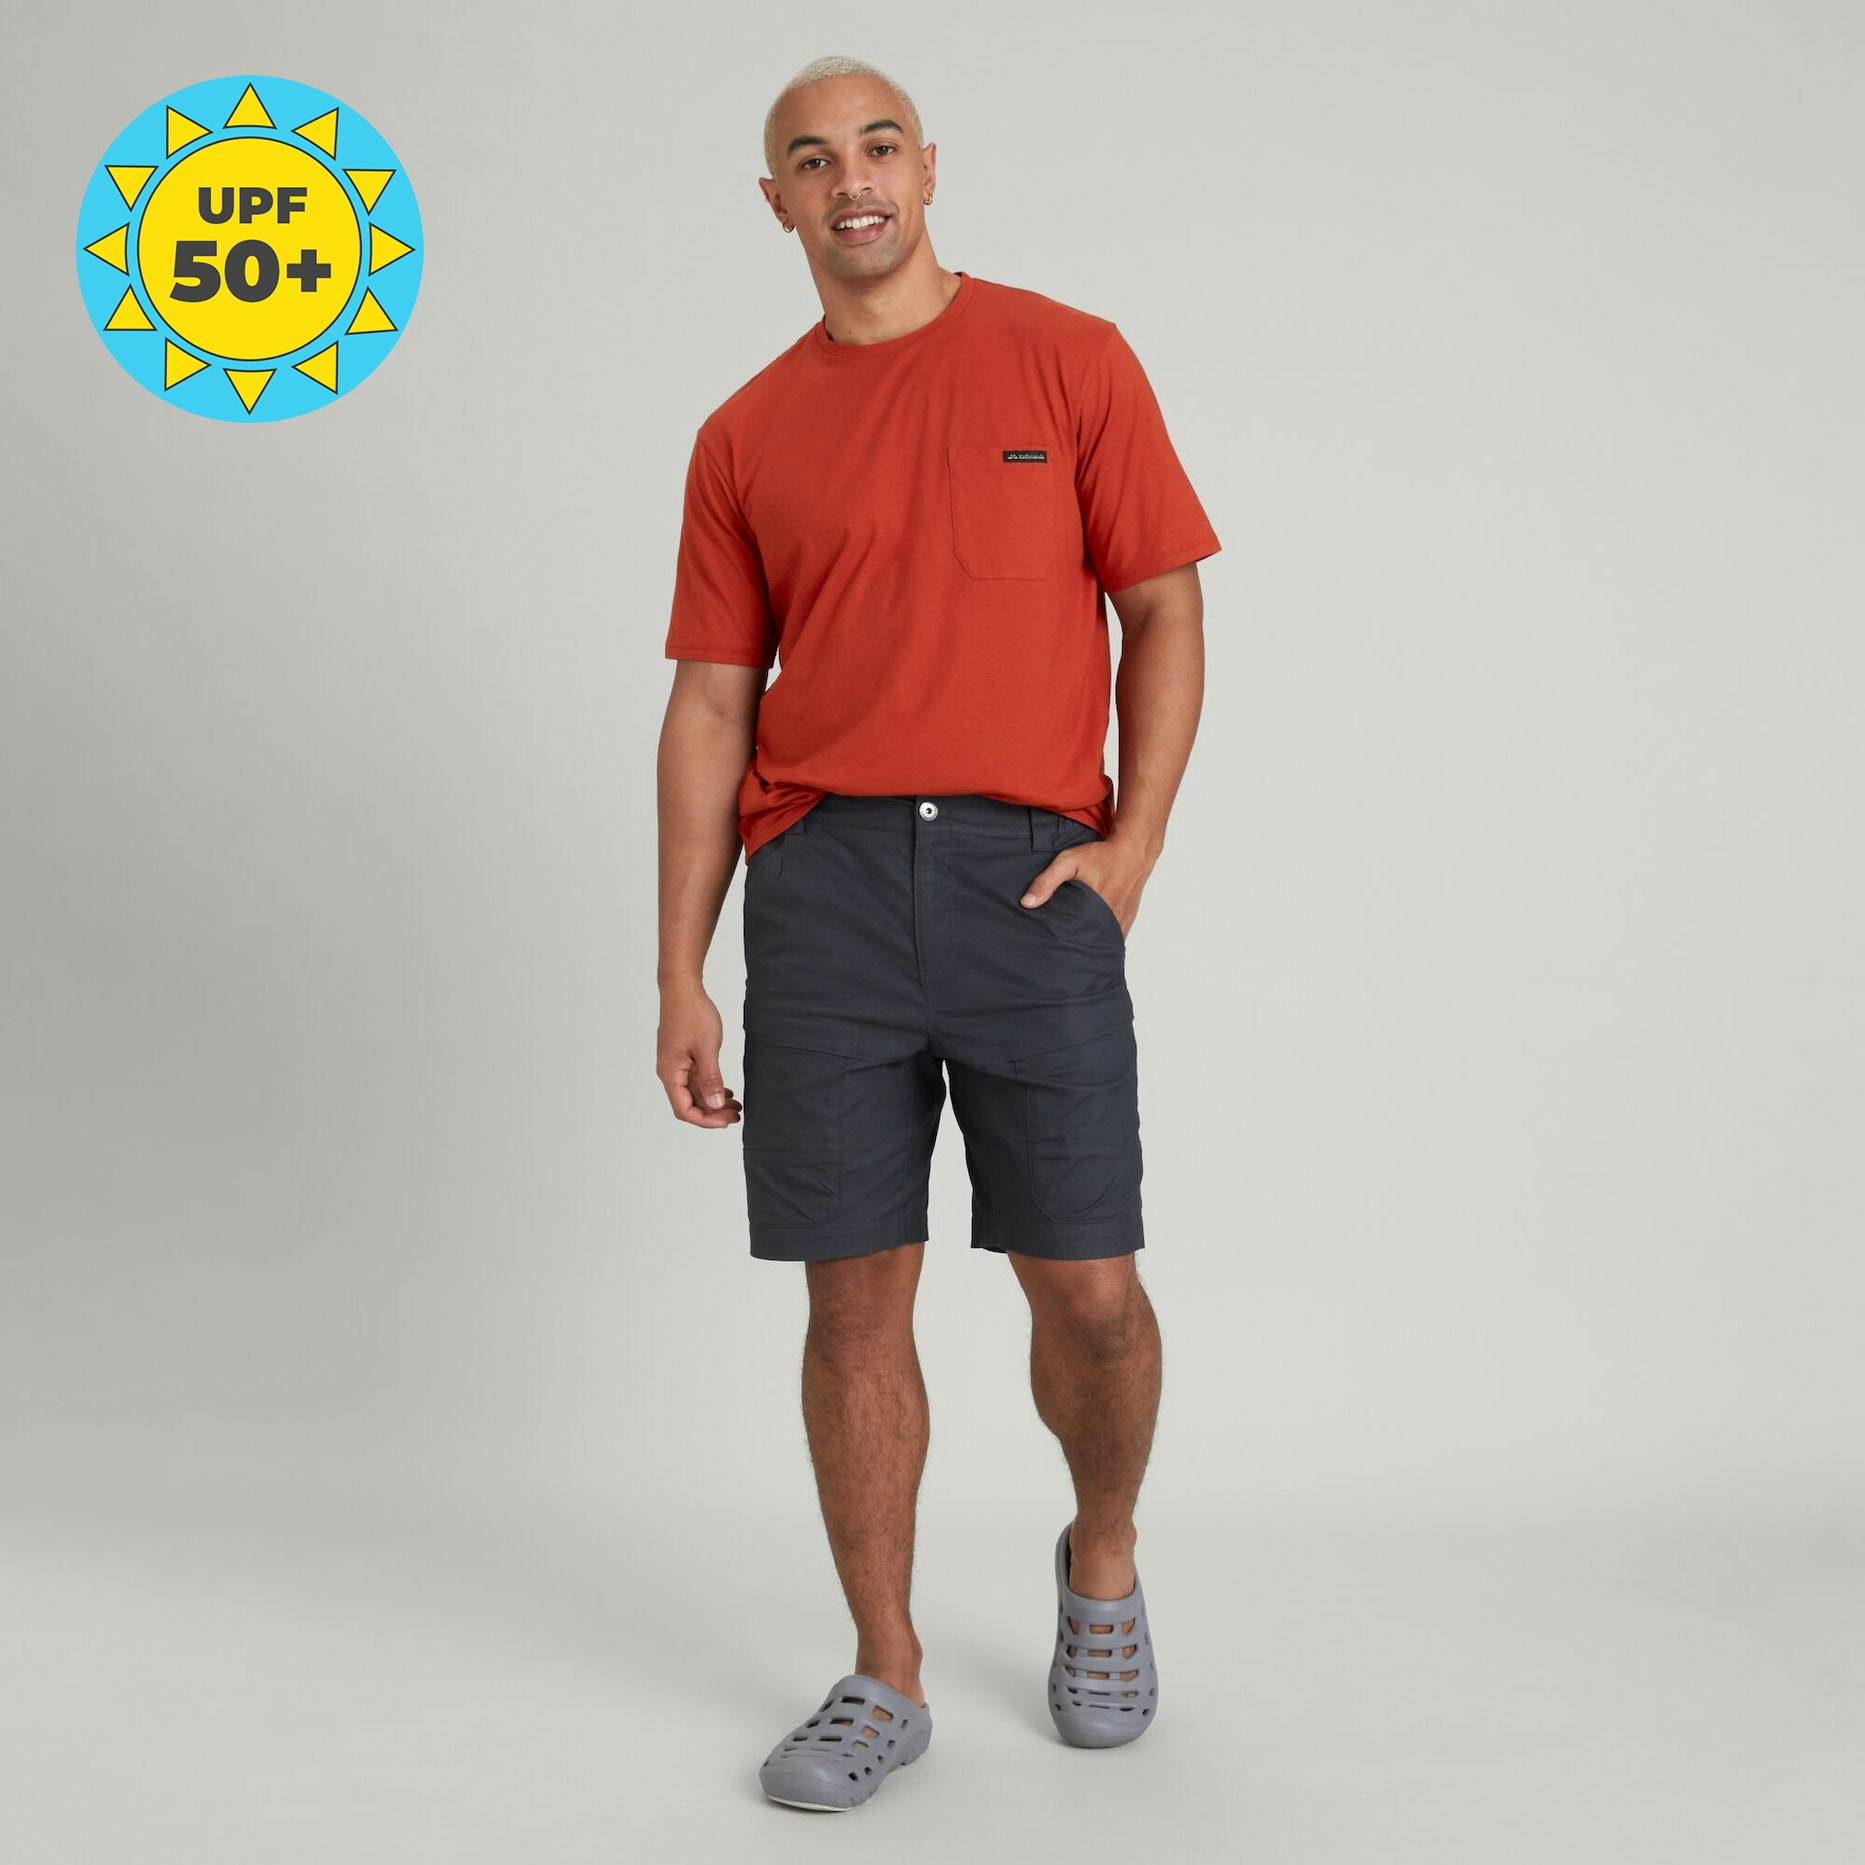 Clearance: WELL.DER.NESS™ Energy Men's 5 Inch Shorts